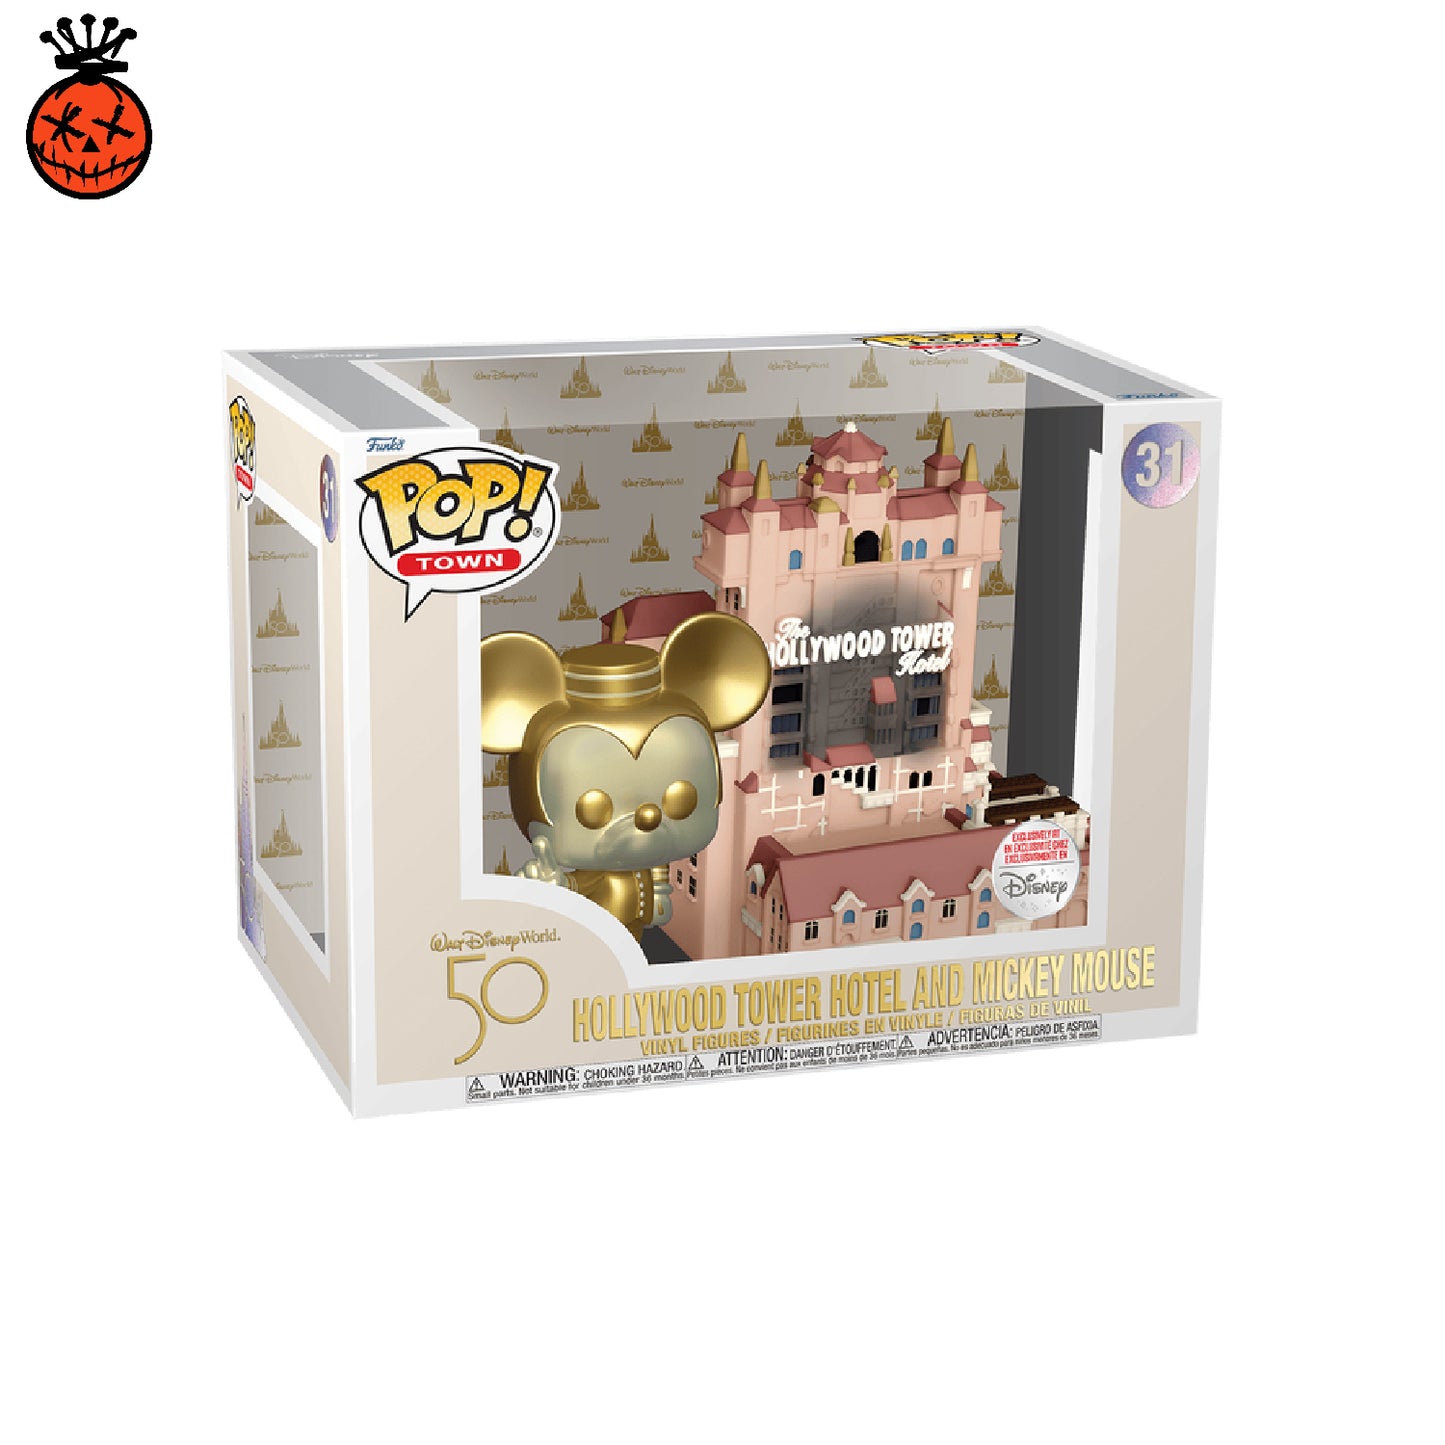 Disney Parks Exclusive POP! TOWN HOLLYWOOD TOWER HOTEL AND MICKEY MOUSE (GOLD